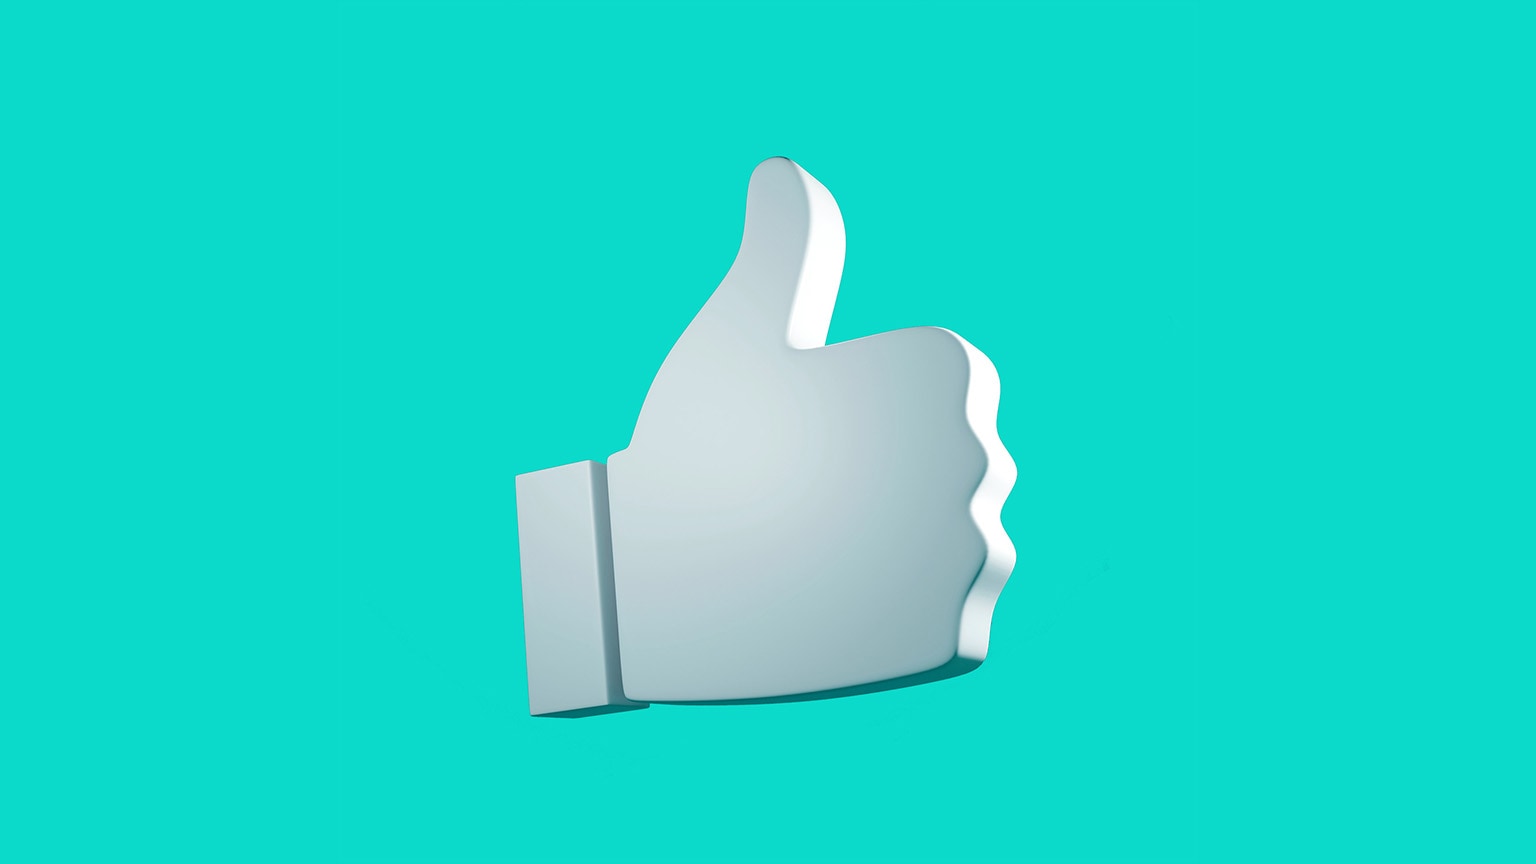 A 3D thumbs up symbol floating against a marine green background.